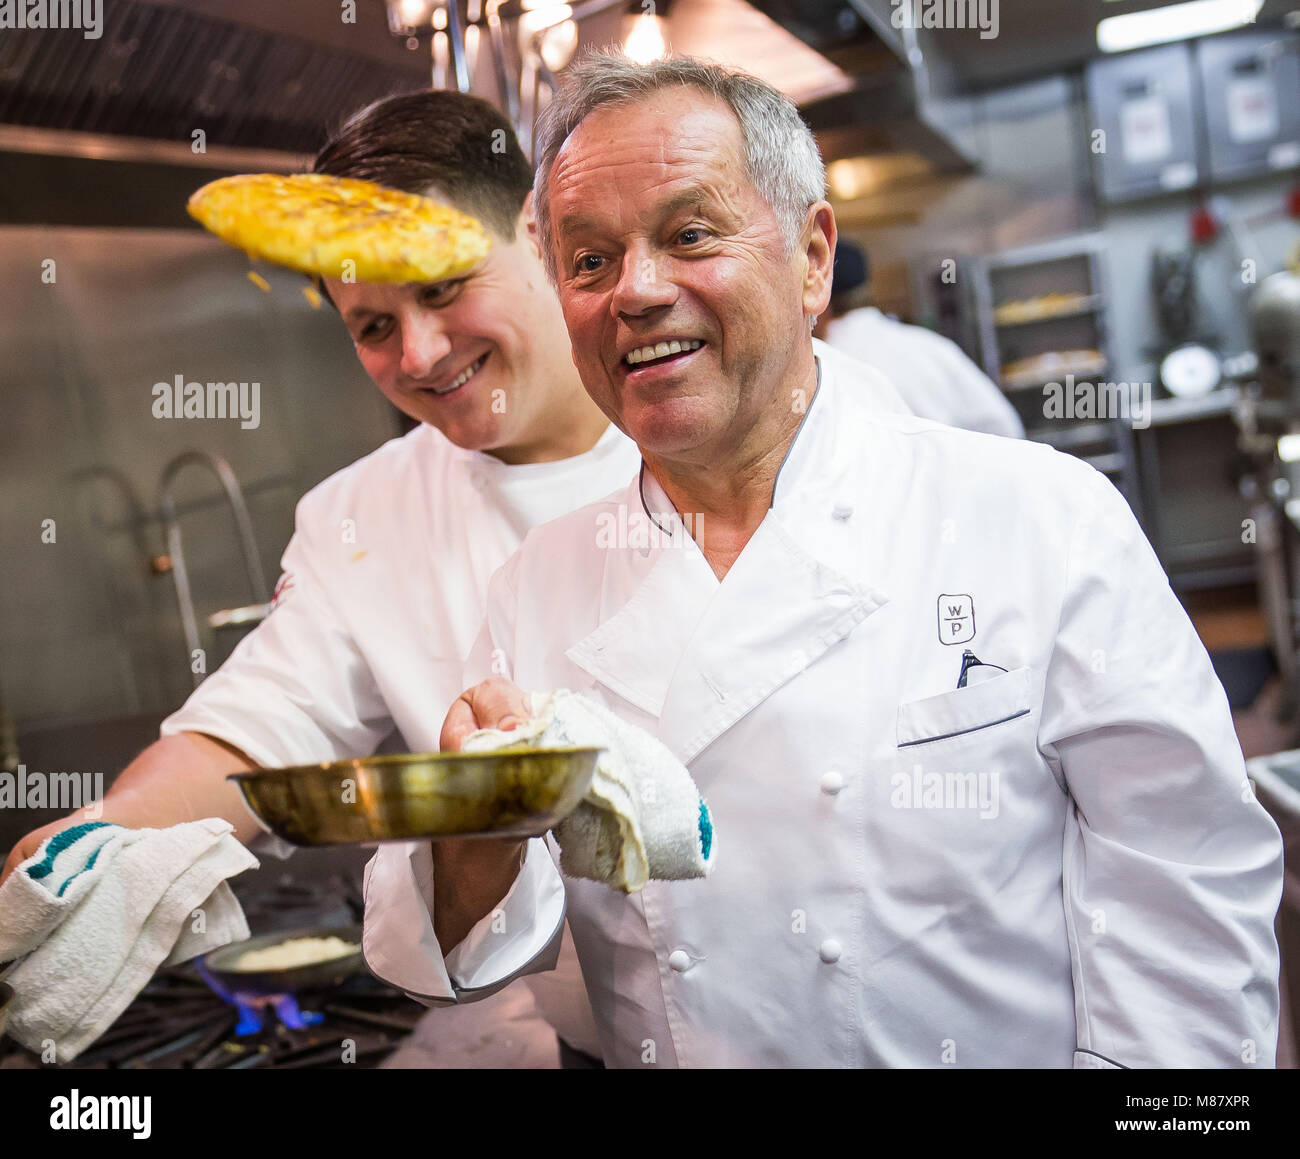 LAS VEGAS, NV - December 11: Eric Klein, executive chef Spago Las Vegas and  Chef Wolfgang Puck pictured as Chef Wolfganag Puck celebrates 20th  Anniversary of Spago Las Vegas at The Forum